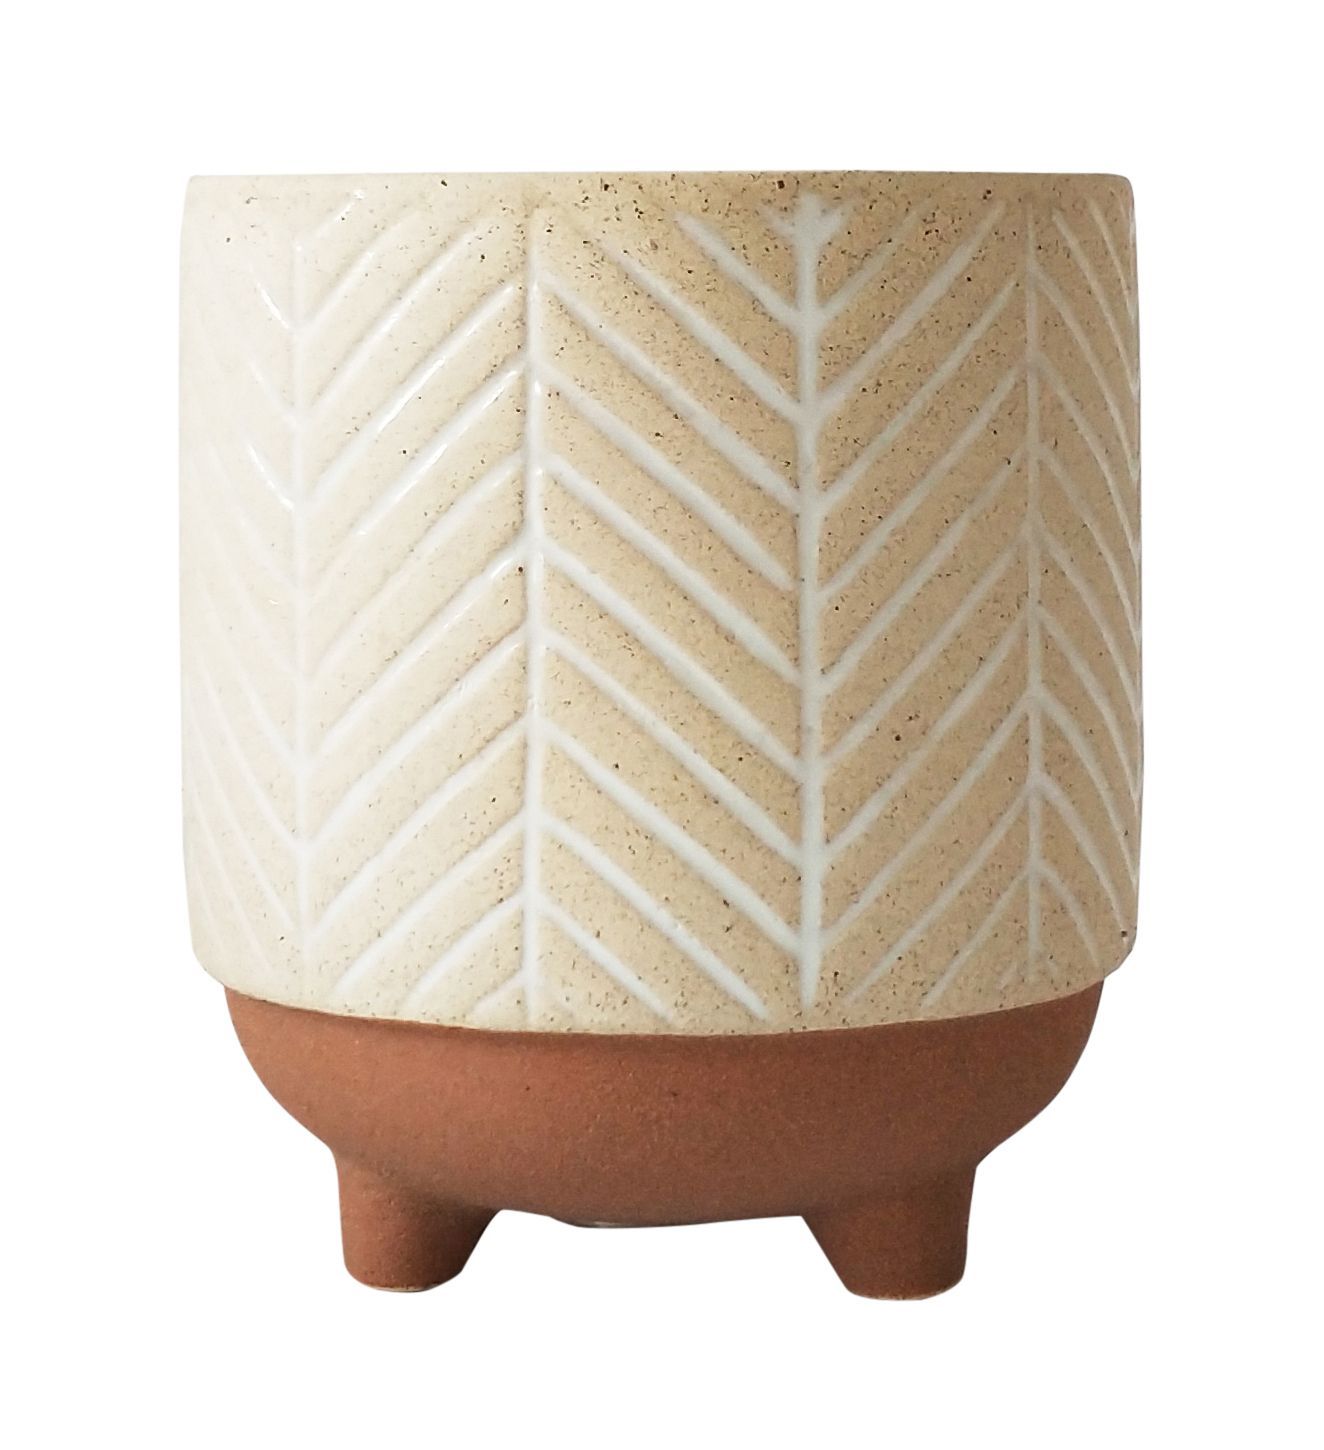 Kyra stripe planter with legs white/terracotta by Urban Products - Toast and honey studio